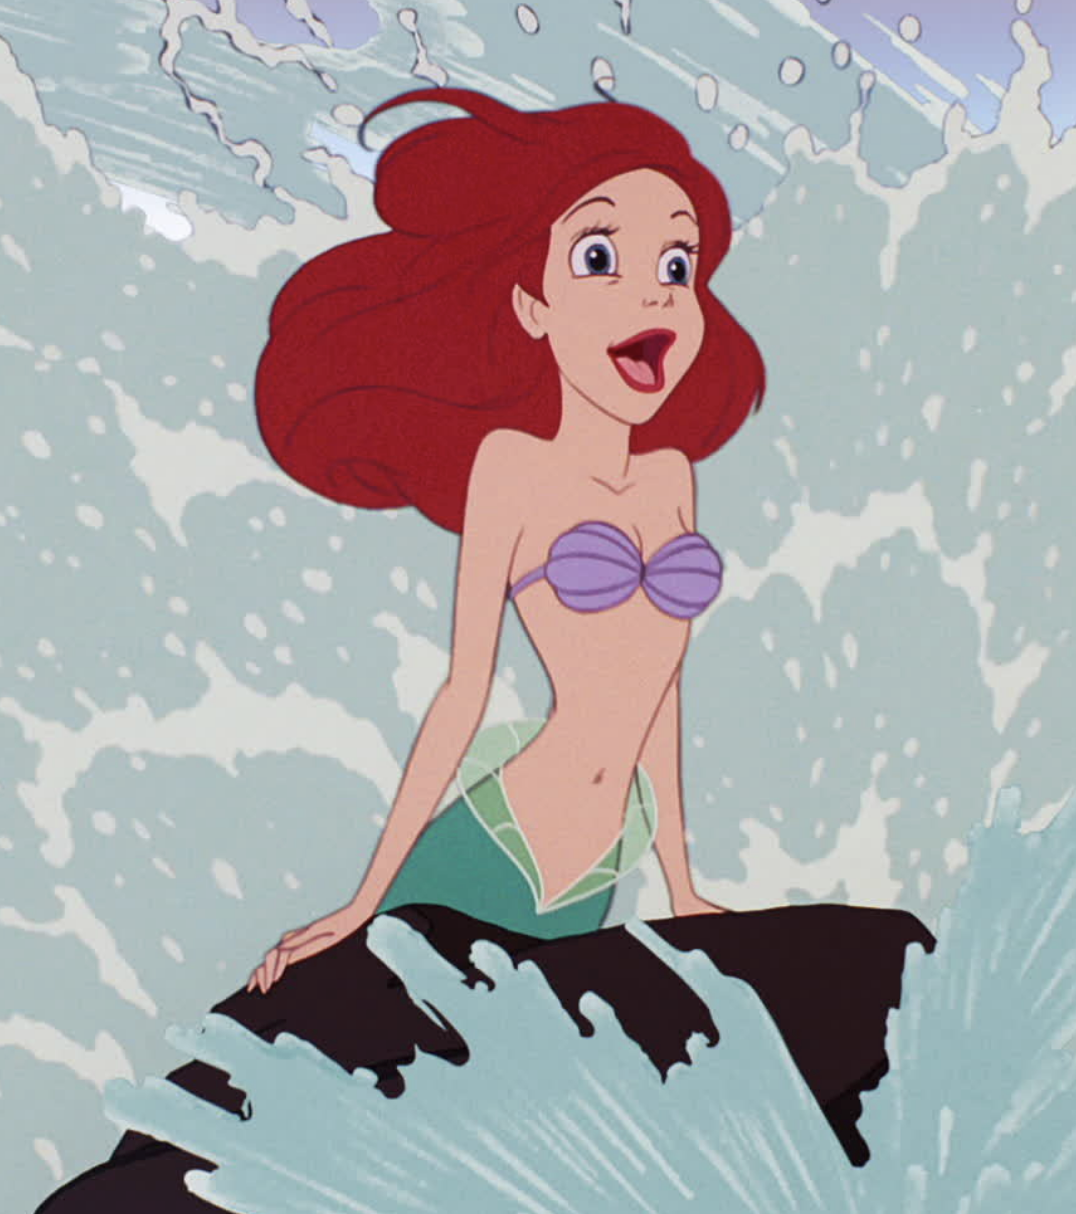 Ariel in the movie as the wave crashes around her